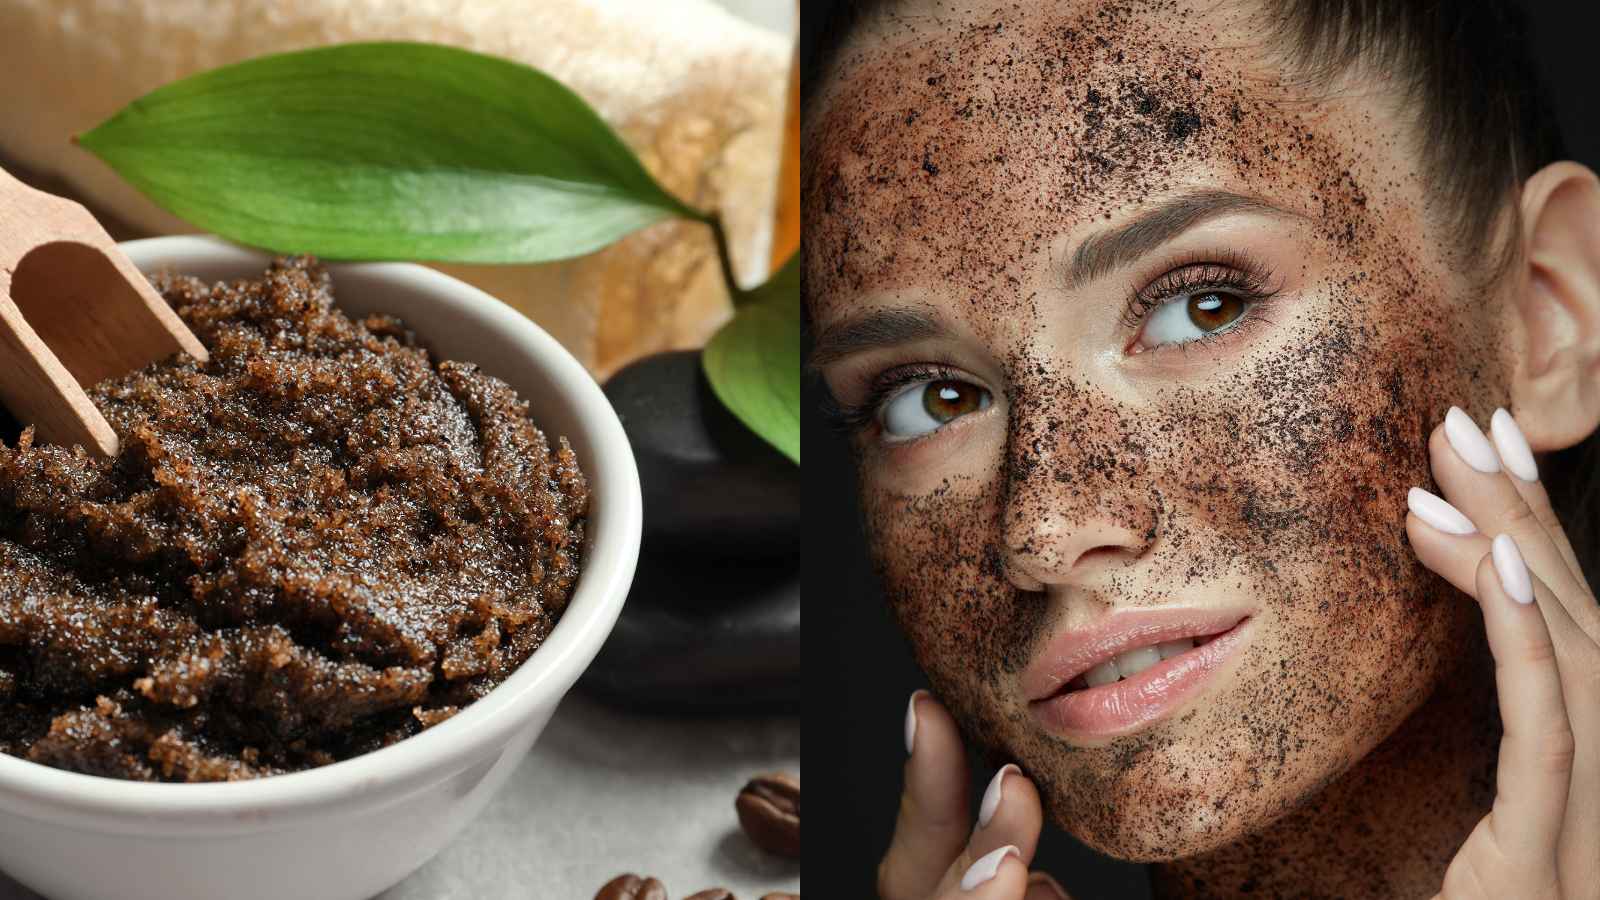 Use semolina and coffee face pack for glowing skin!